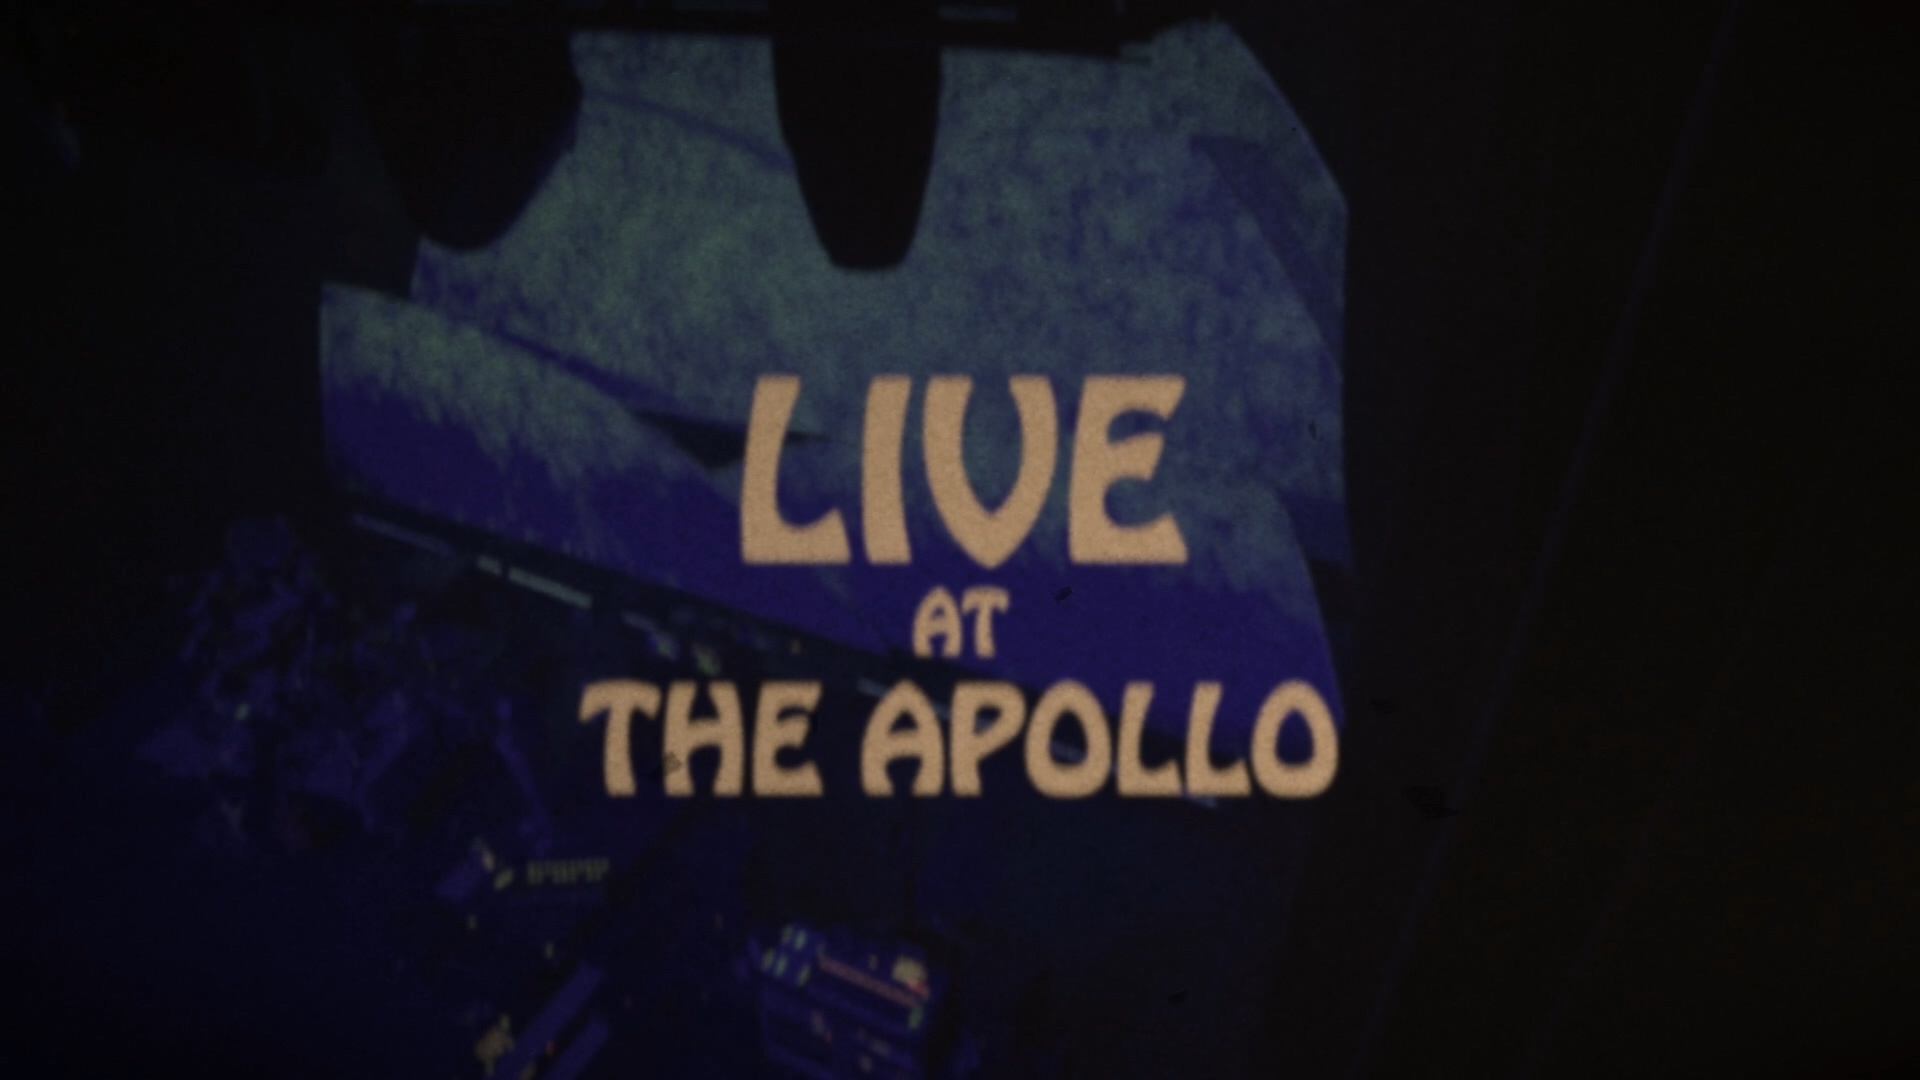 00000.m2ts(Yes - Live at the Apollo 2017 (2018) Blu-ray)_20180915_195045.881.jpg